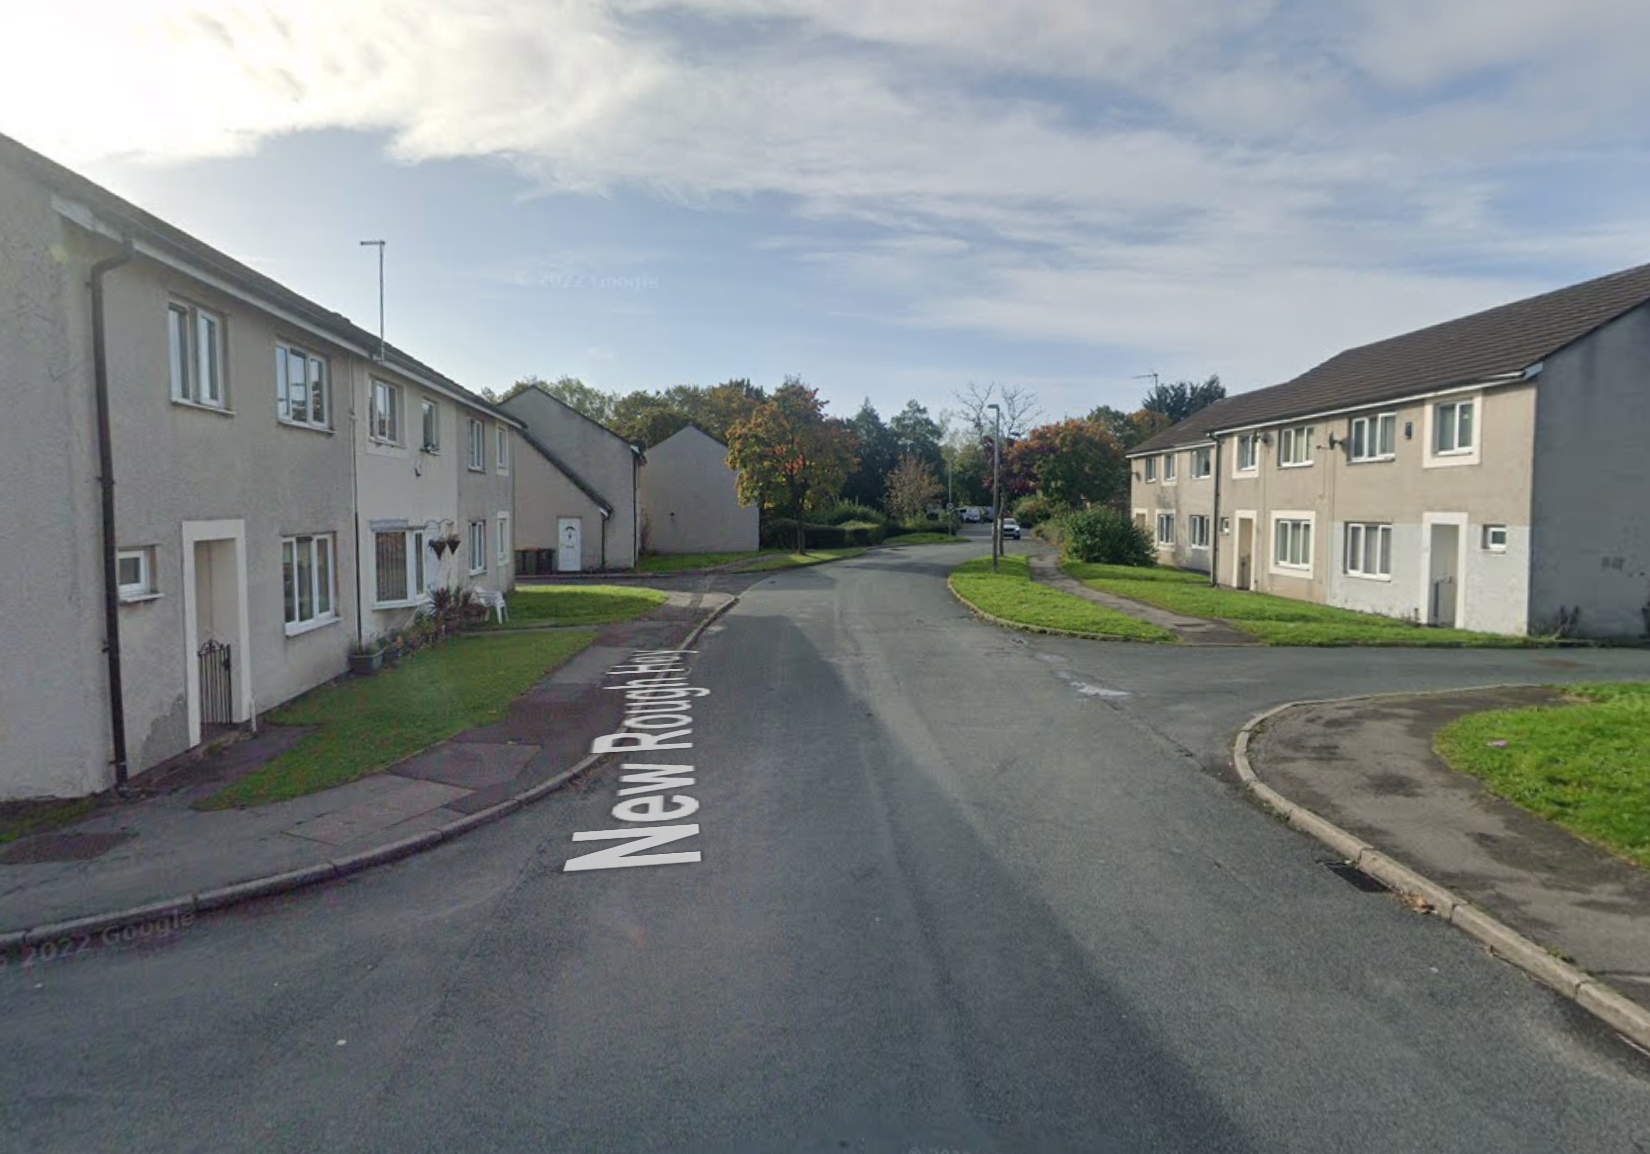 The boy was killed while riding his bike in Ingol, Lancashire